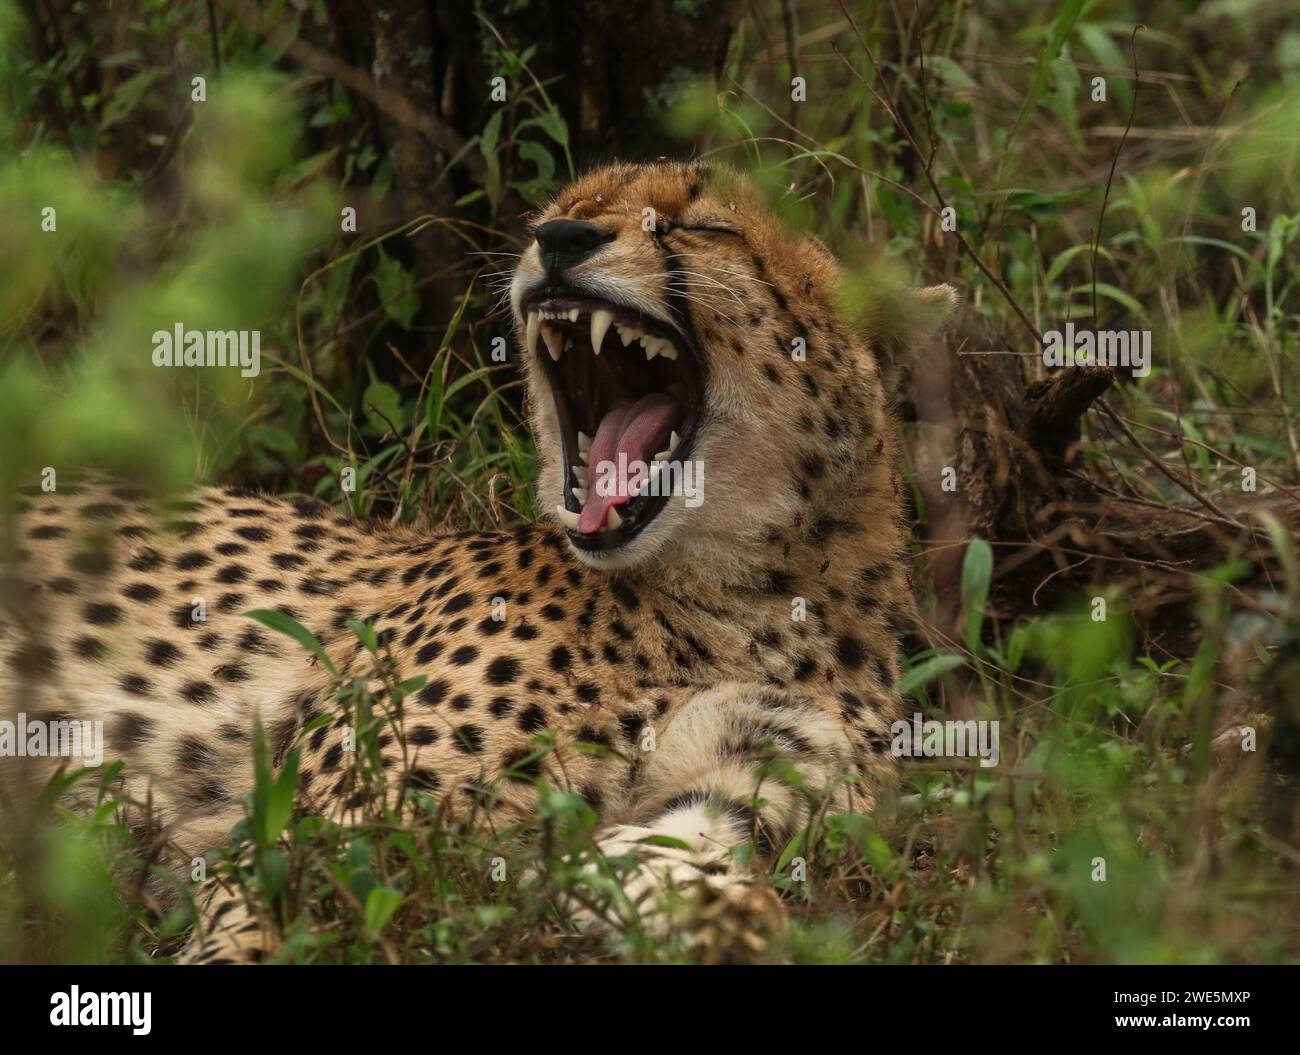 Cheetah resting while displaying an open mouth Stock Photo